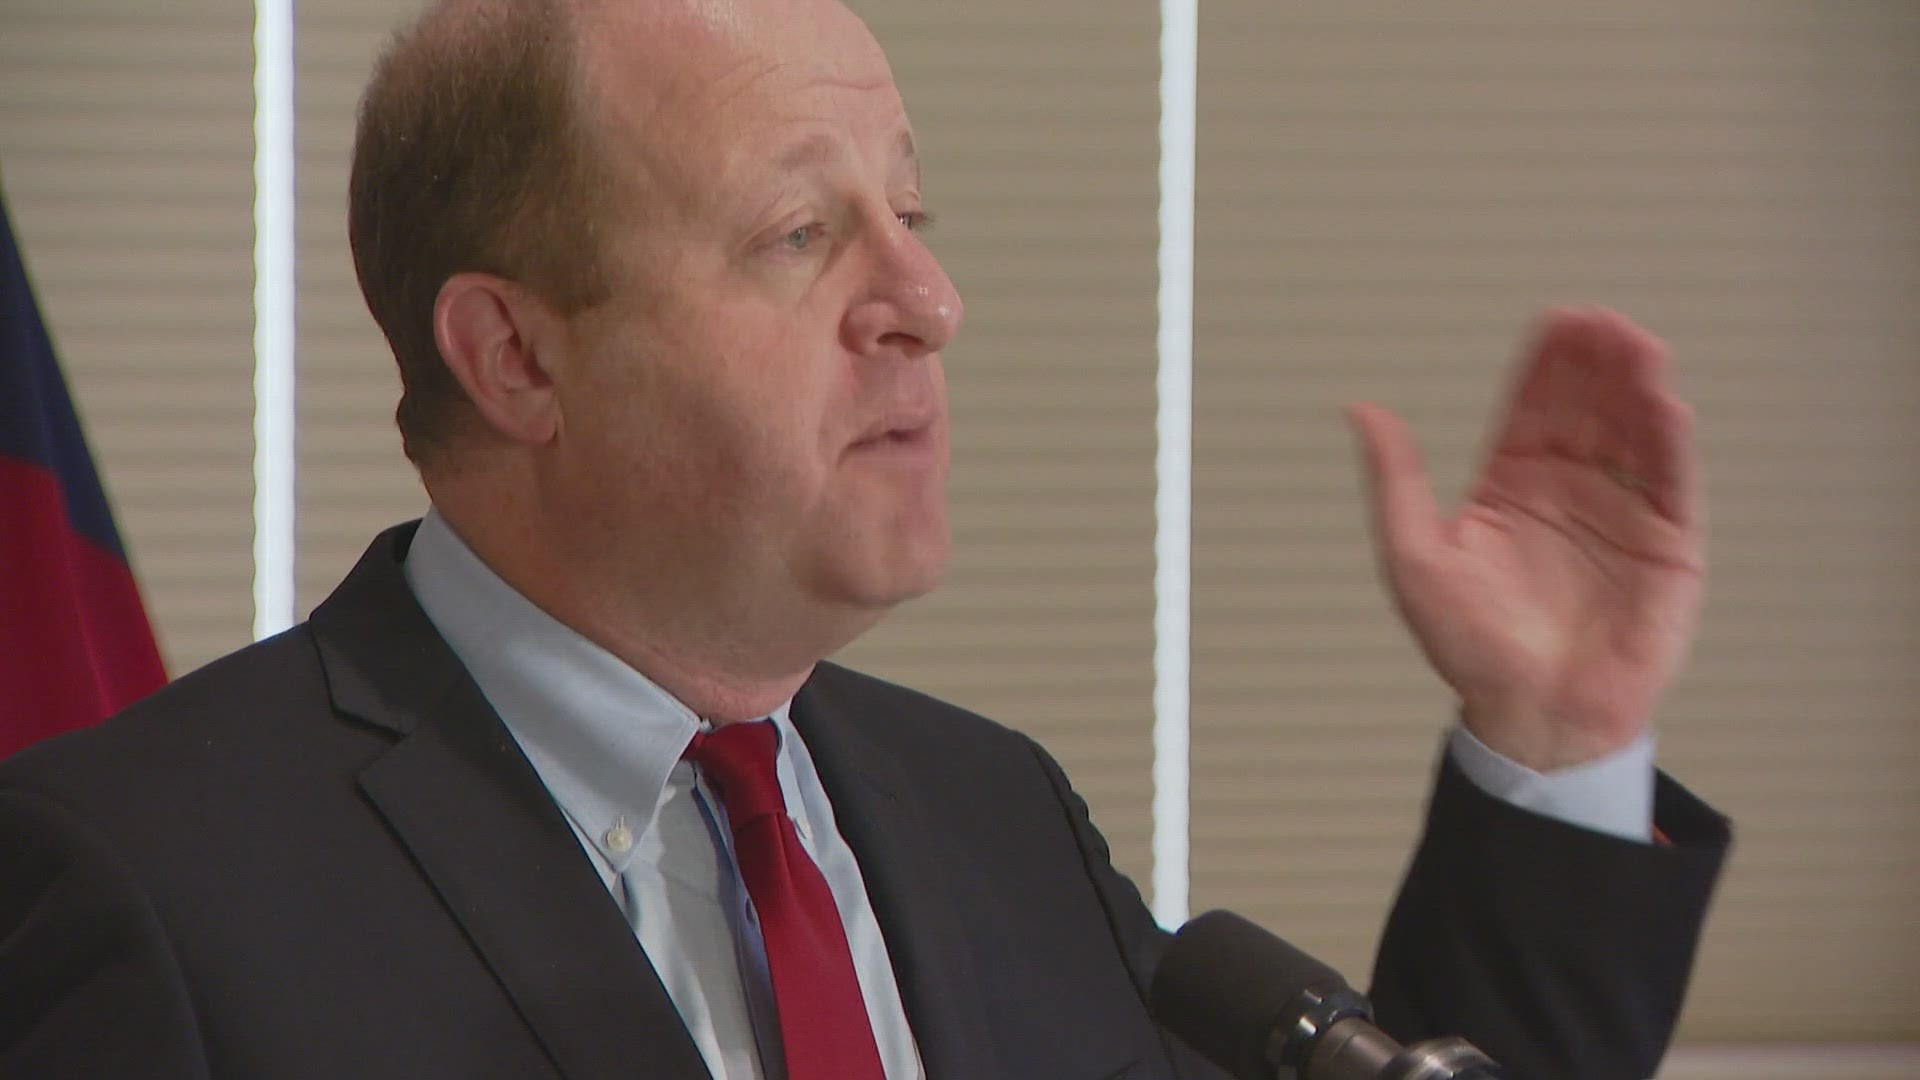 After voters rejected Proposition HH, Democratic Governor Jared Polis called for a special session to start one week from tomorrow.